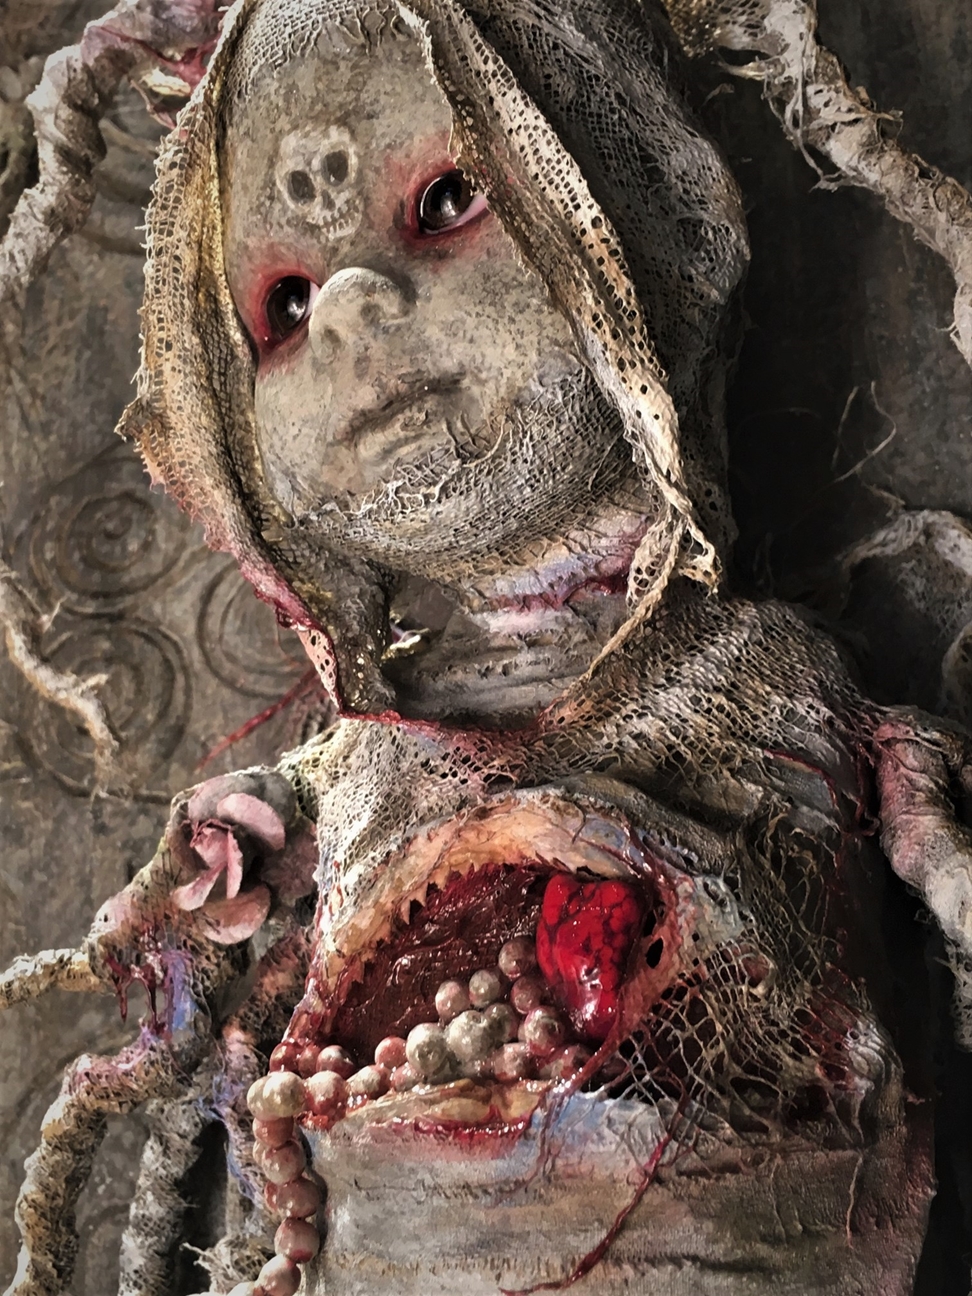 close up dark art mixed media assemblage sculpture of a macabre baby made with porcelain, bone & rope